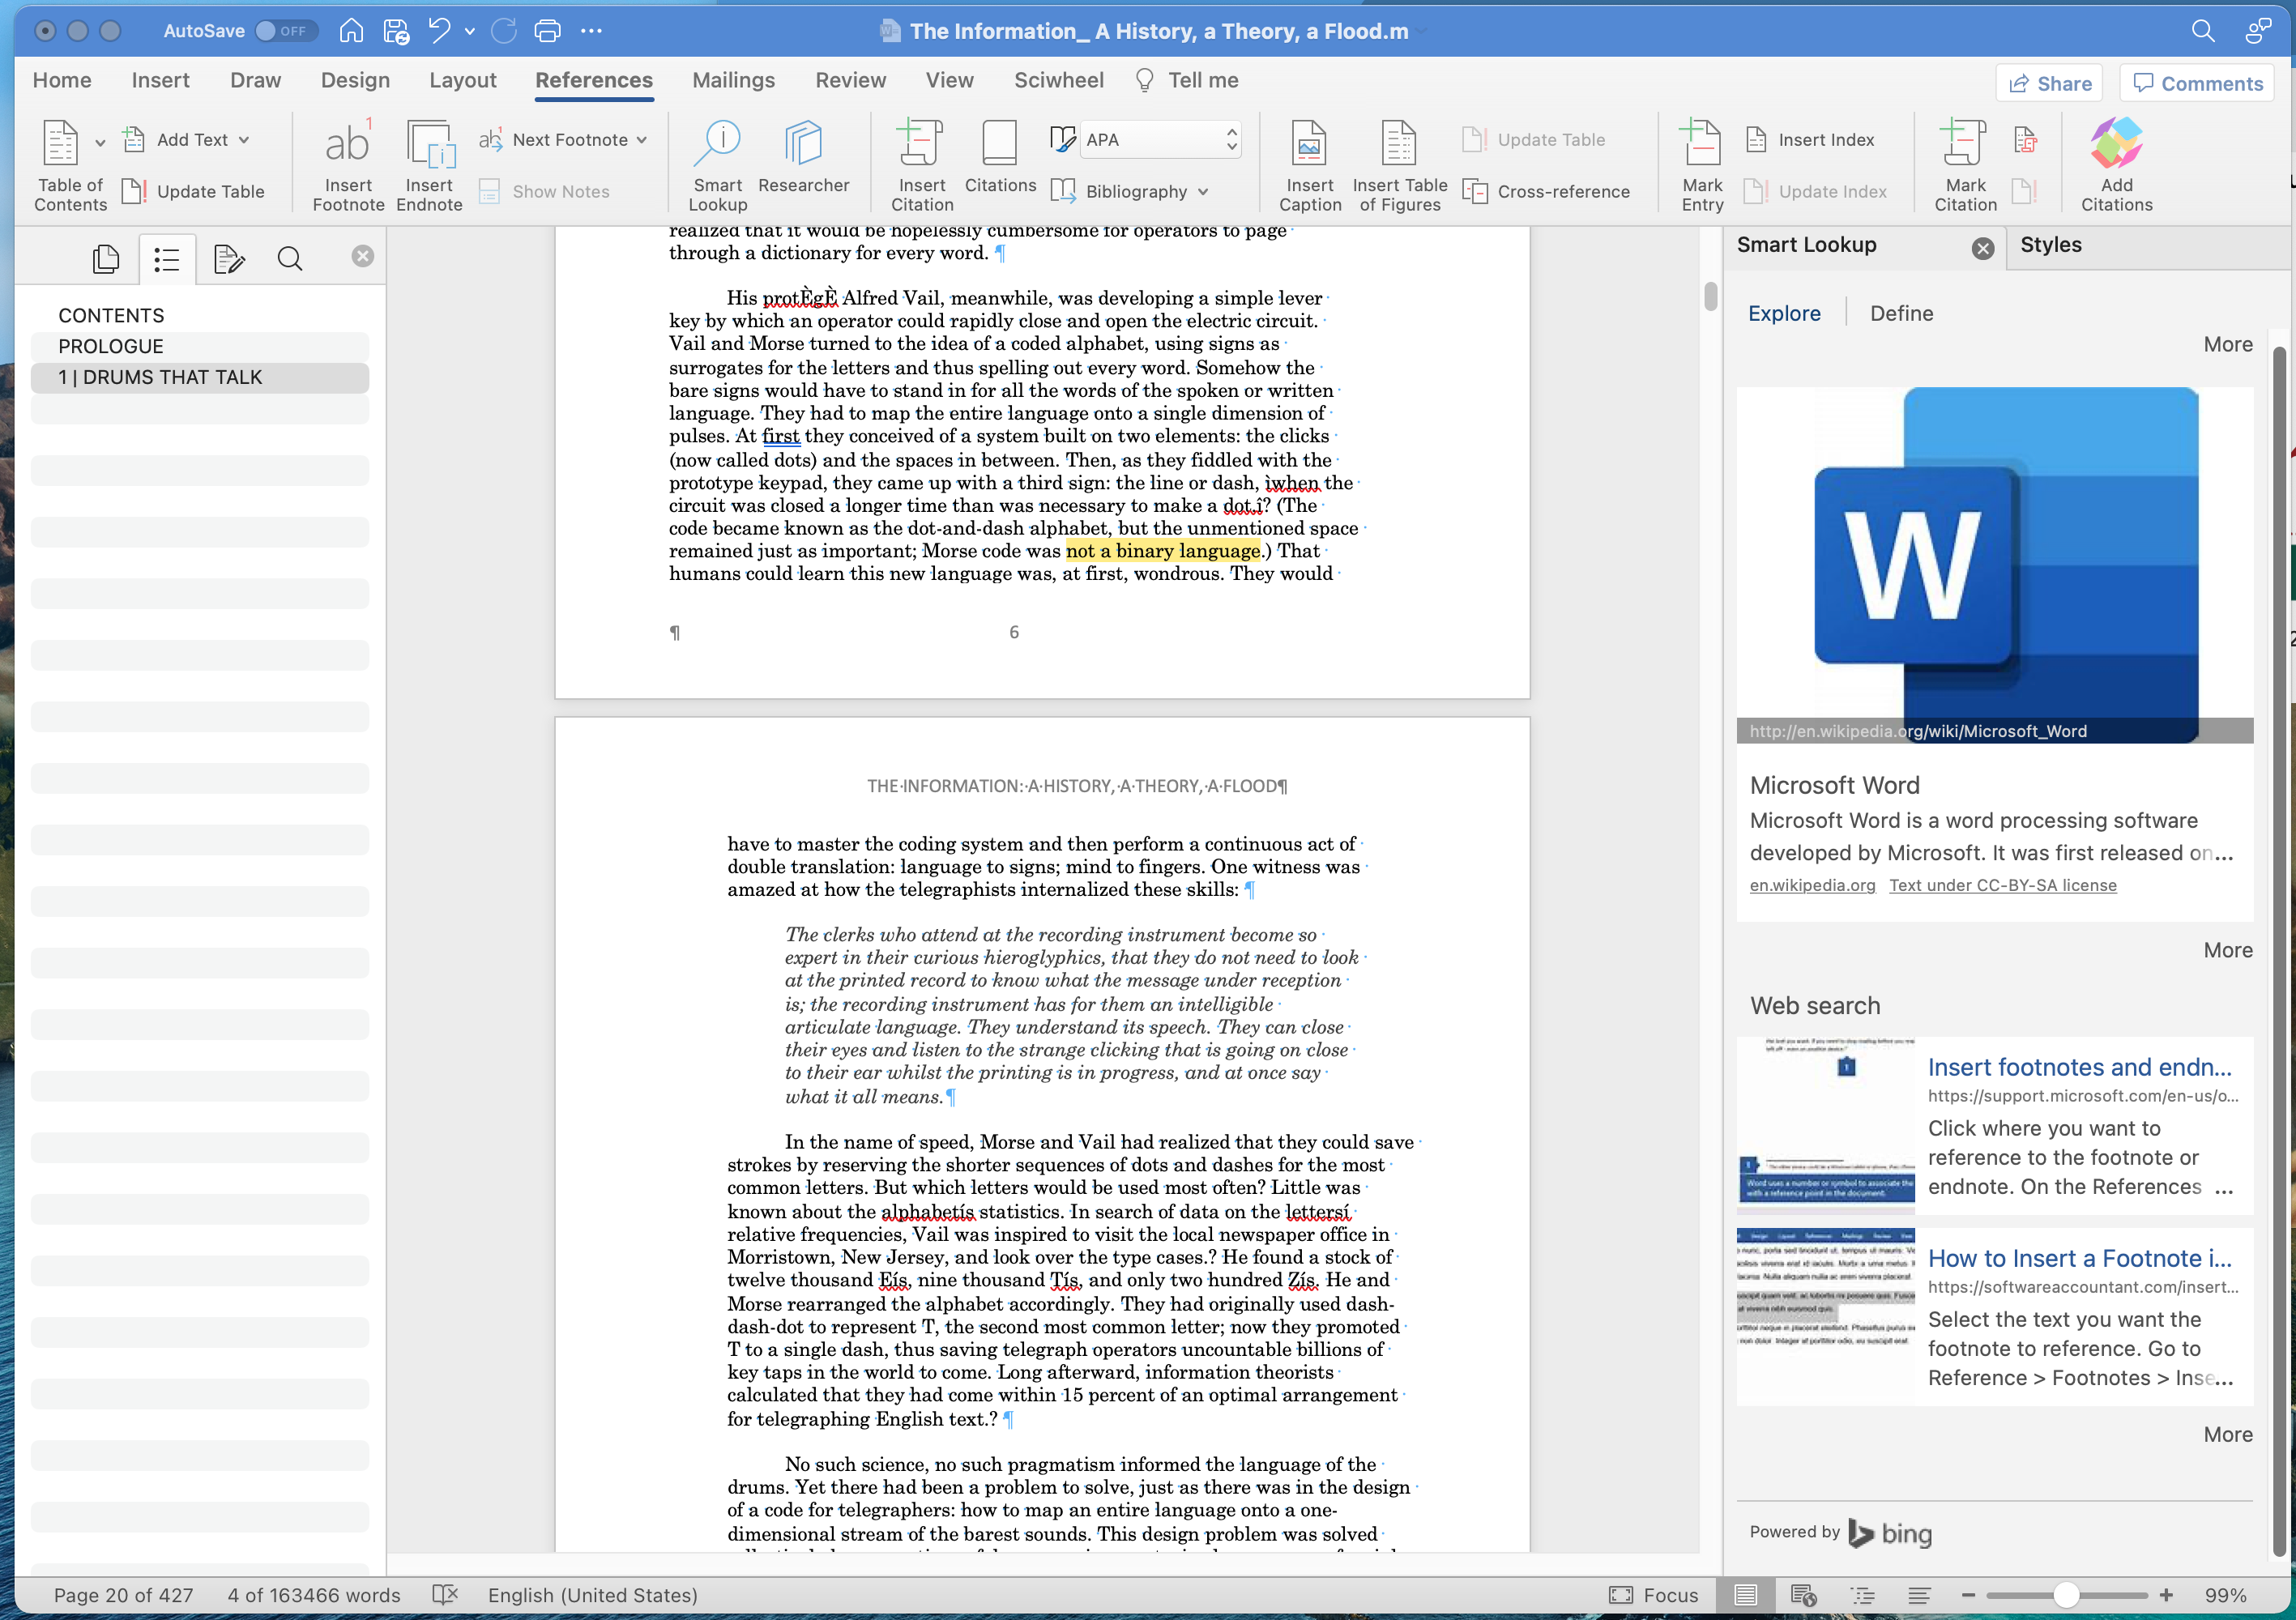 [MSWord 365 foot/endnote tool and location mac]